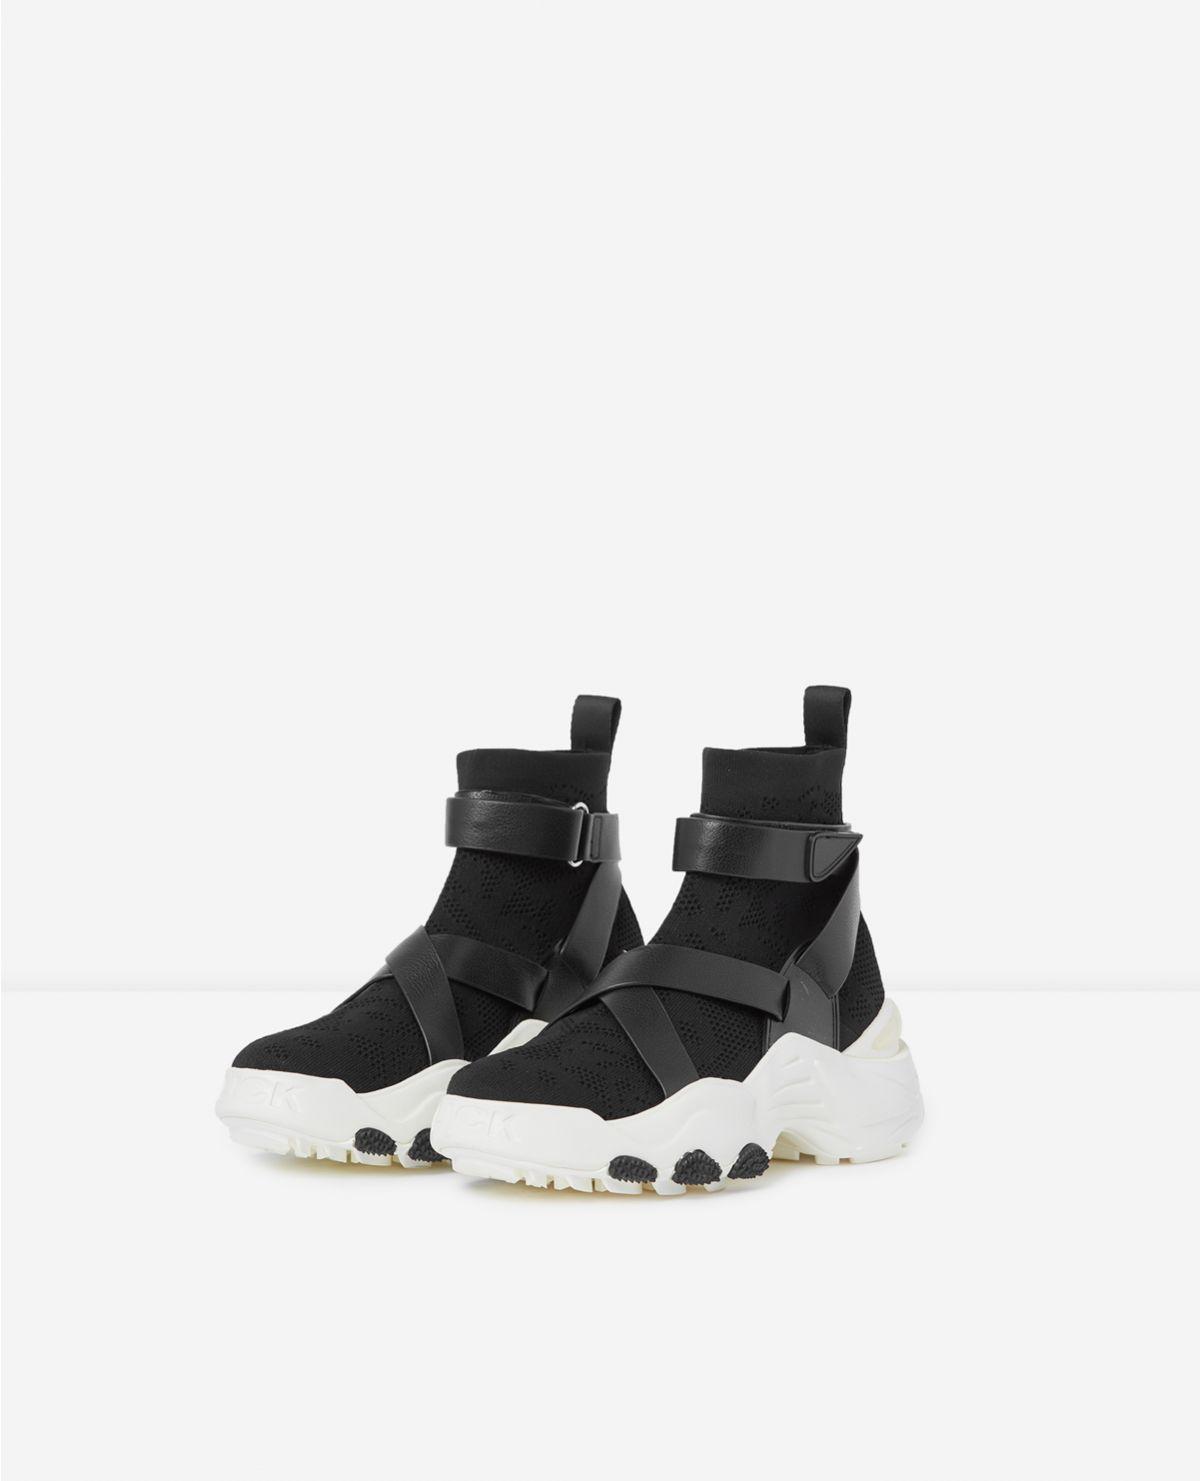 black high top trainers